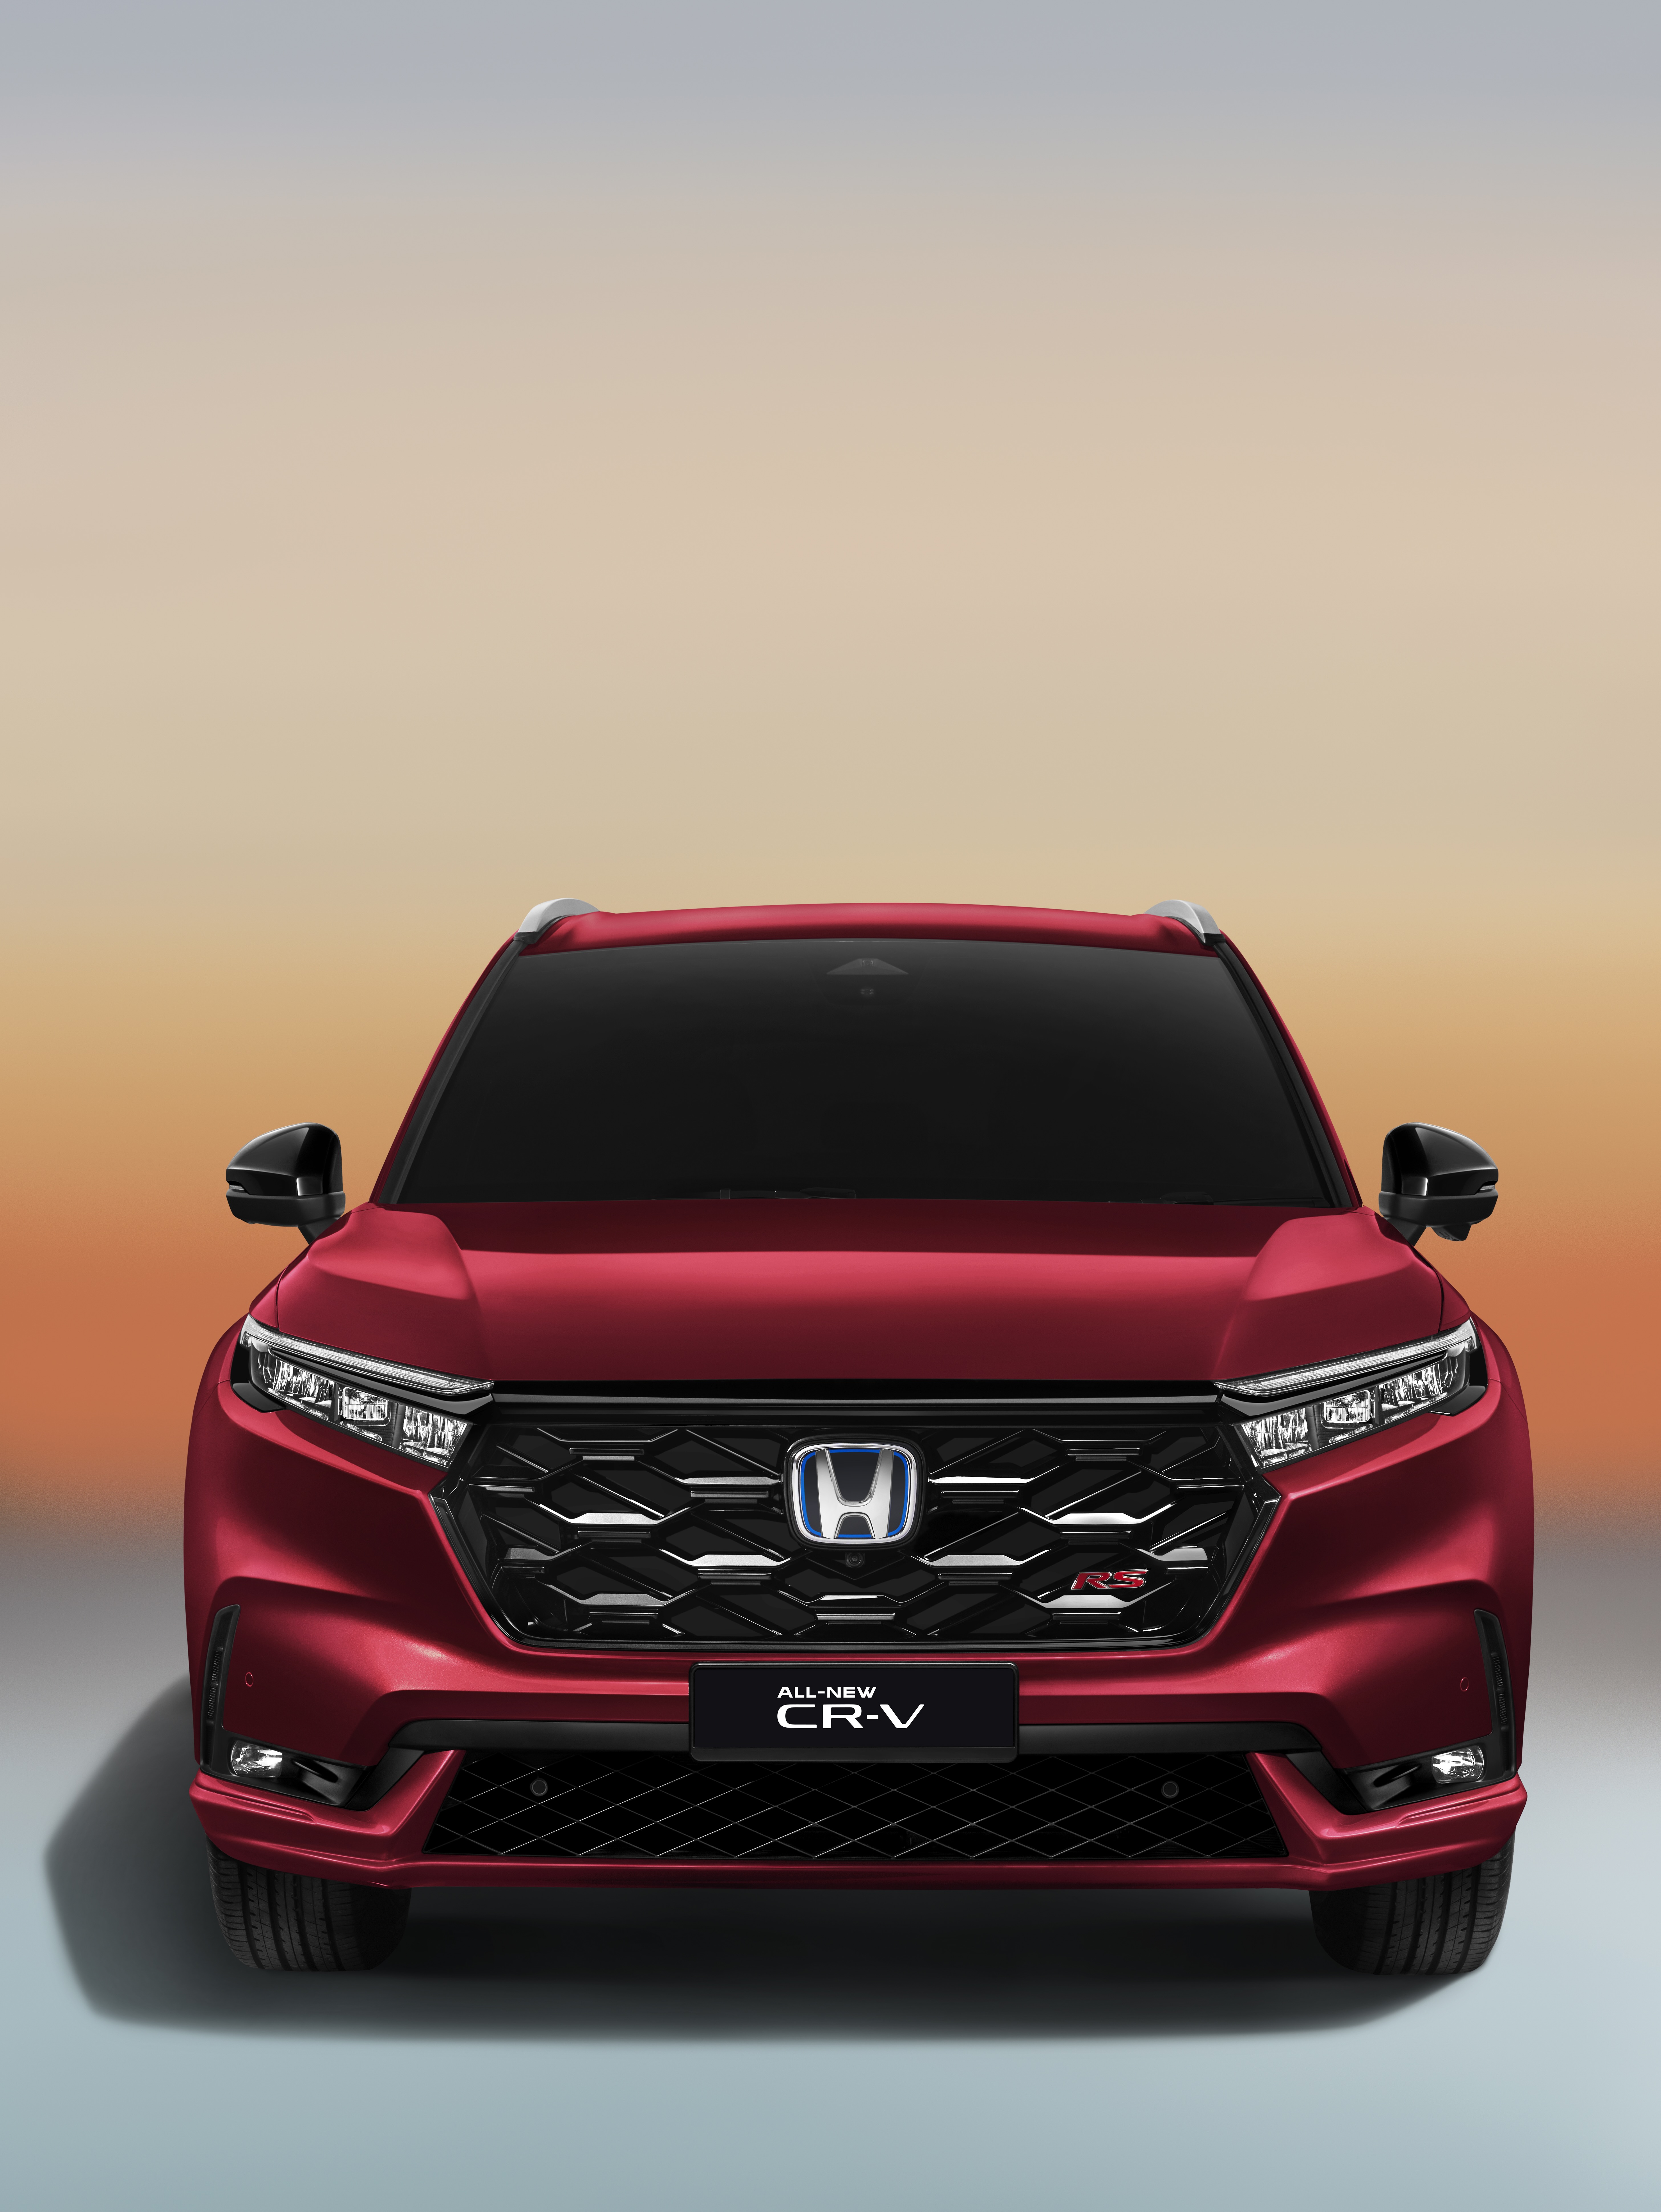 Malaysia’s Most Awaited SUV, The All-New CR-V  Is Arriving With A New Generation 2.0L e:HEV Powertrain - thumbnail